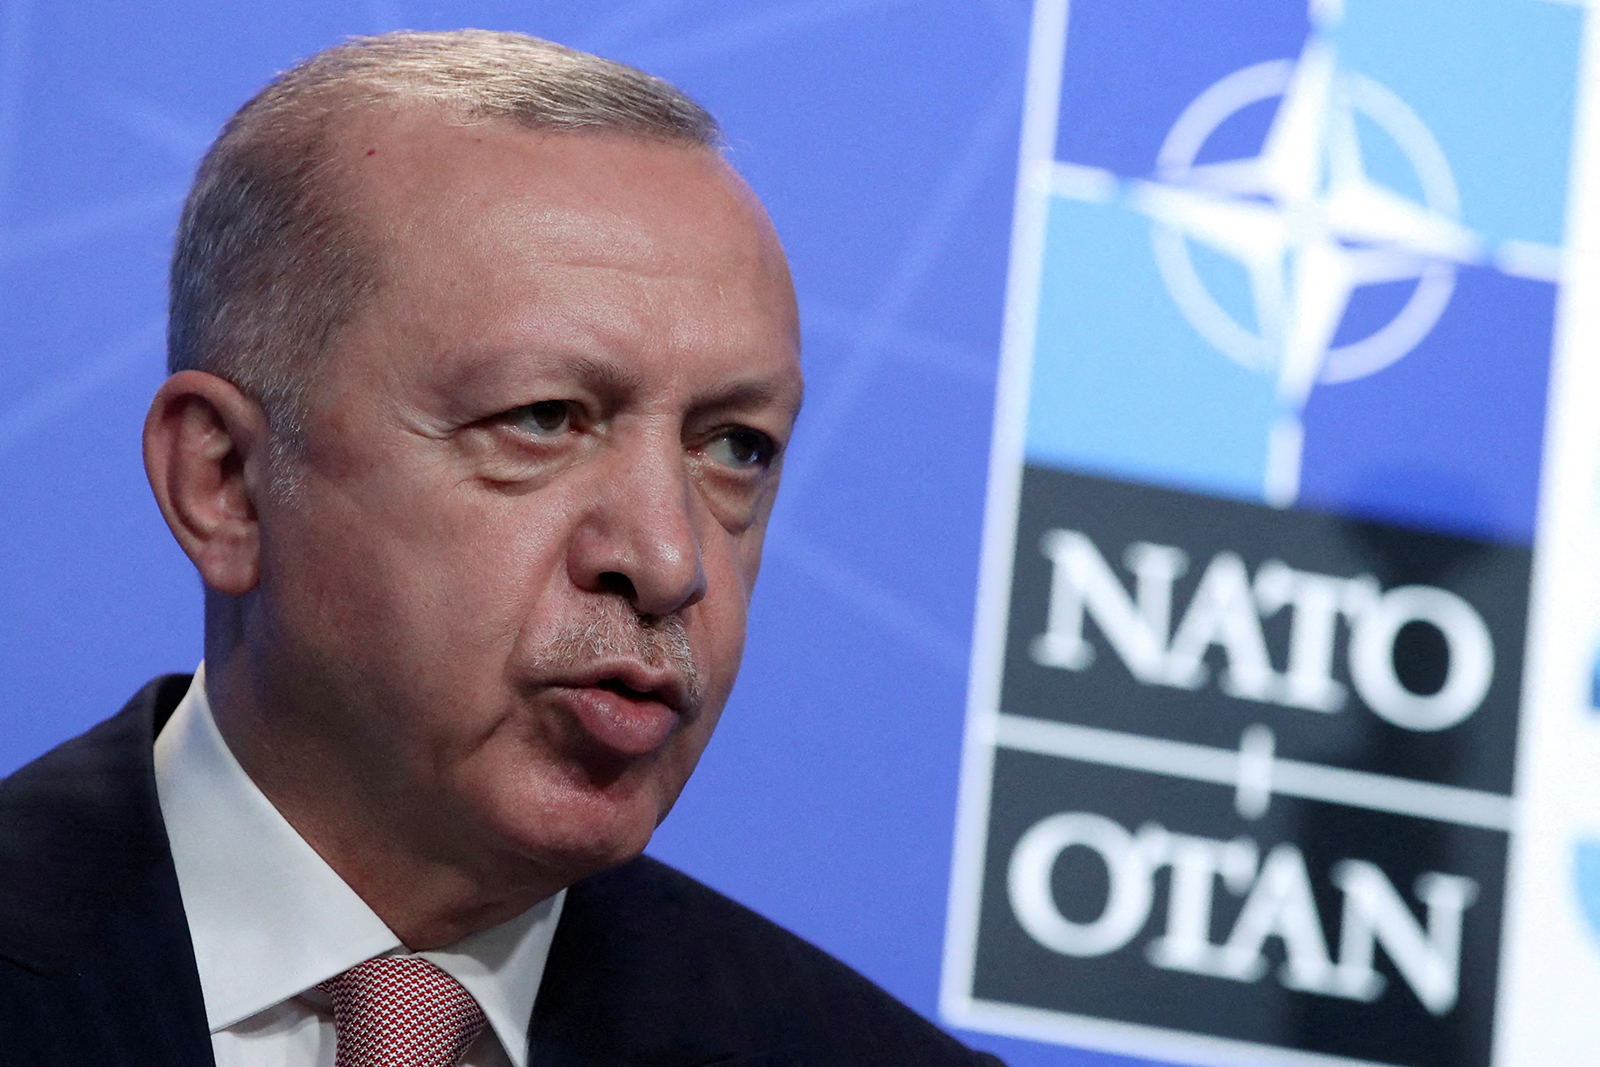 Turkey's President Tayyip Erdogan holds a news conference during the NATO summit at the Alliance's headquarters in Brussels, Belgium June 14, 2021. 